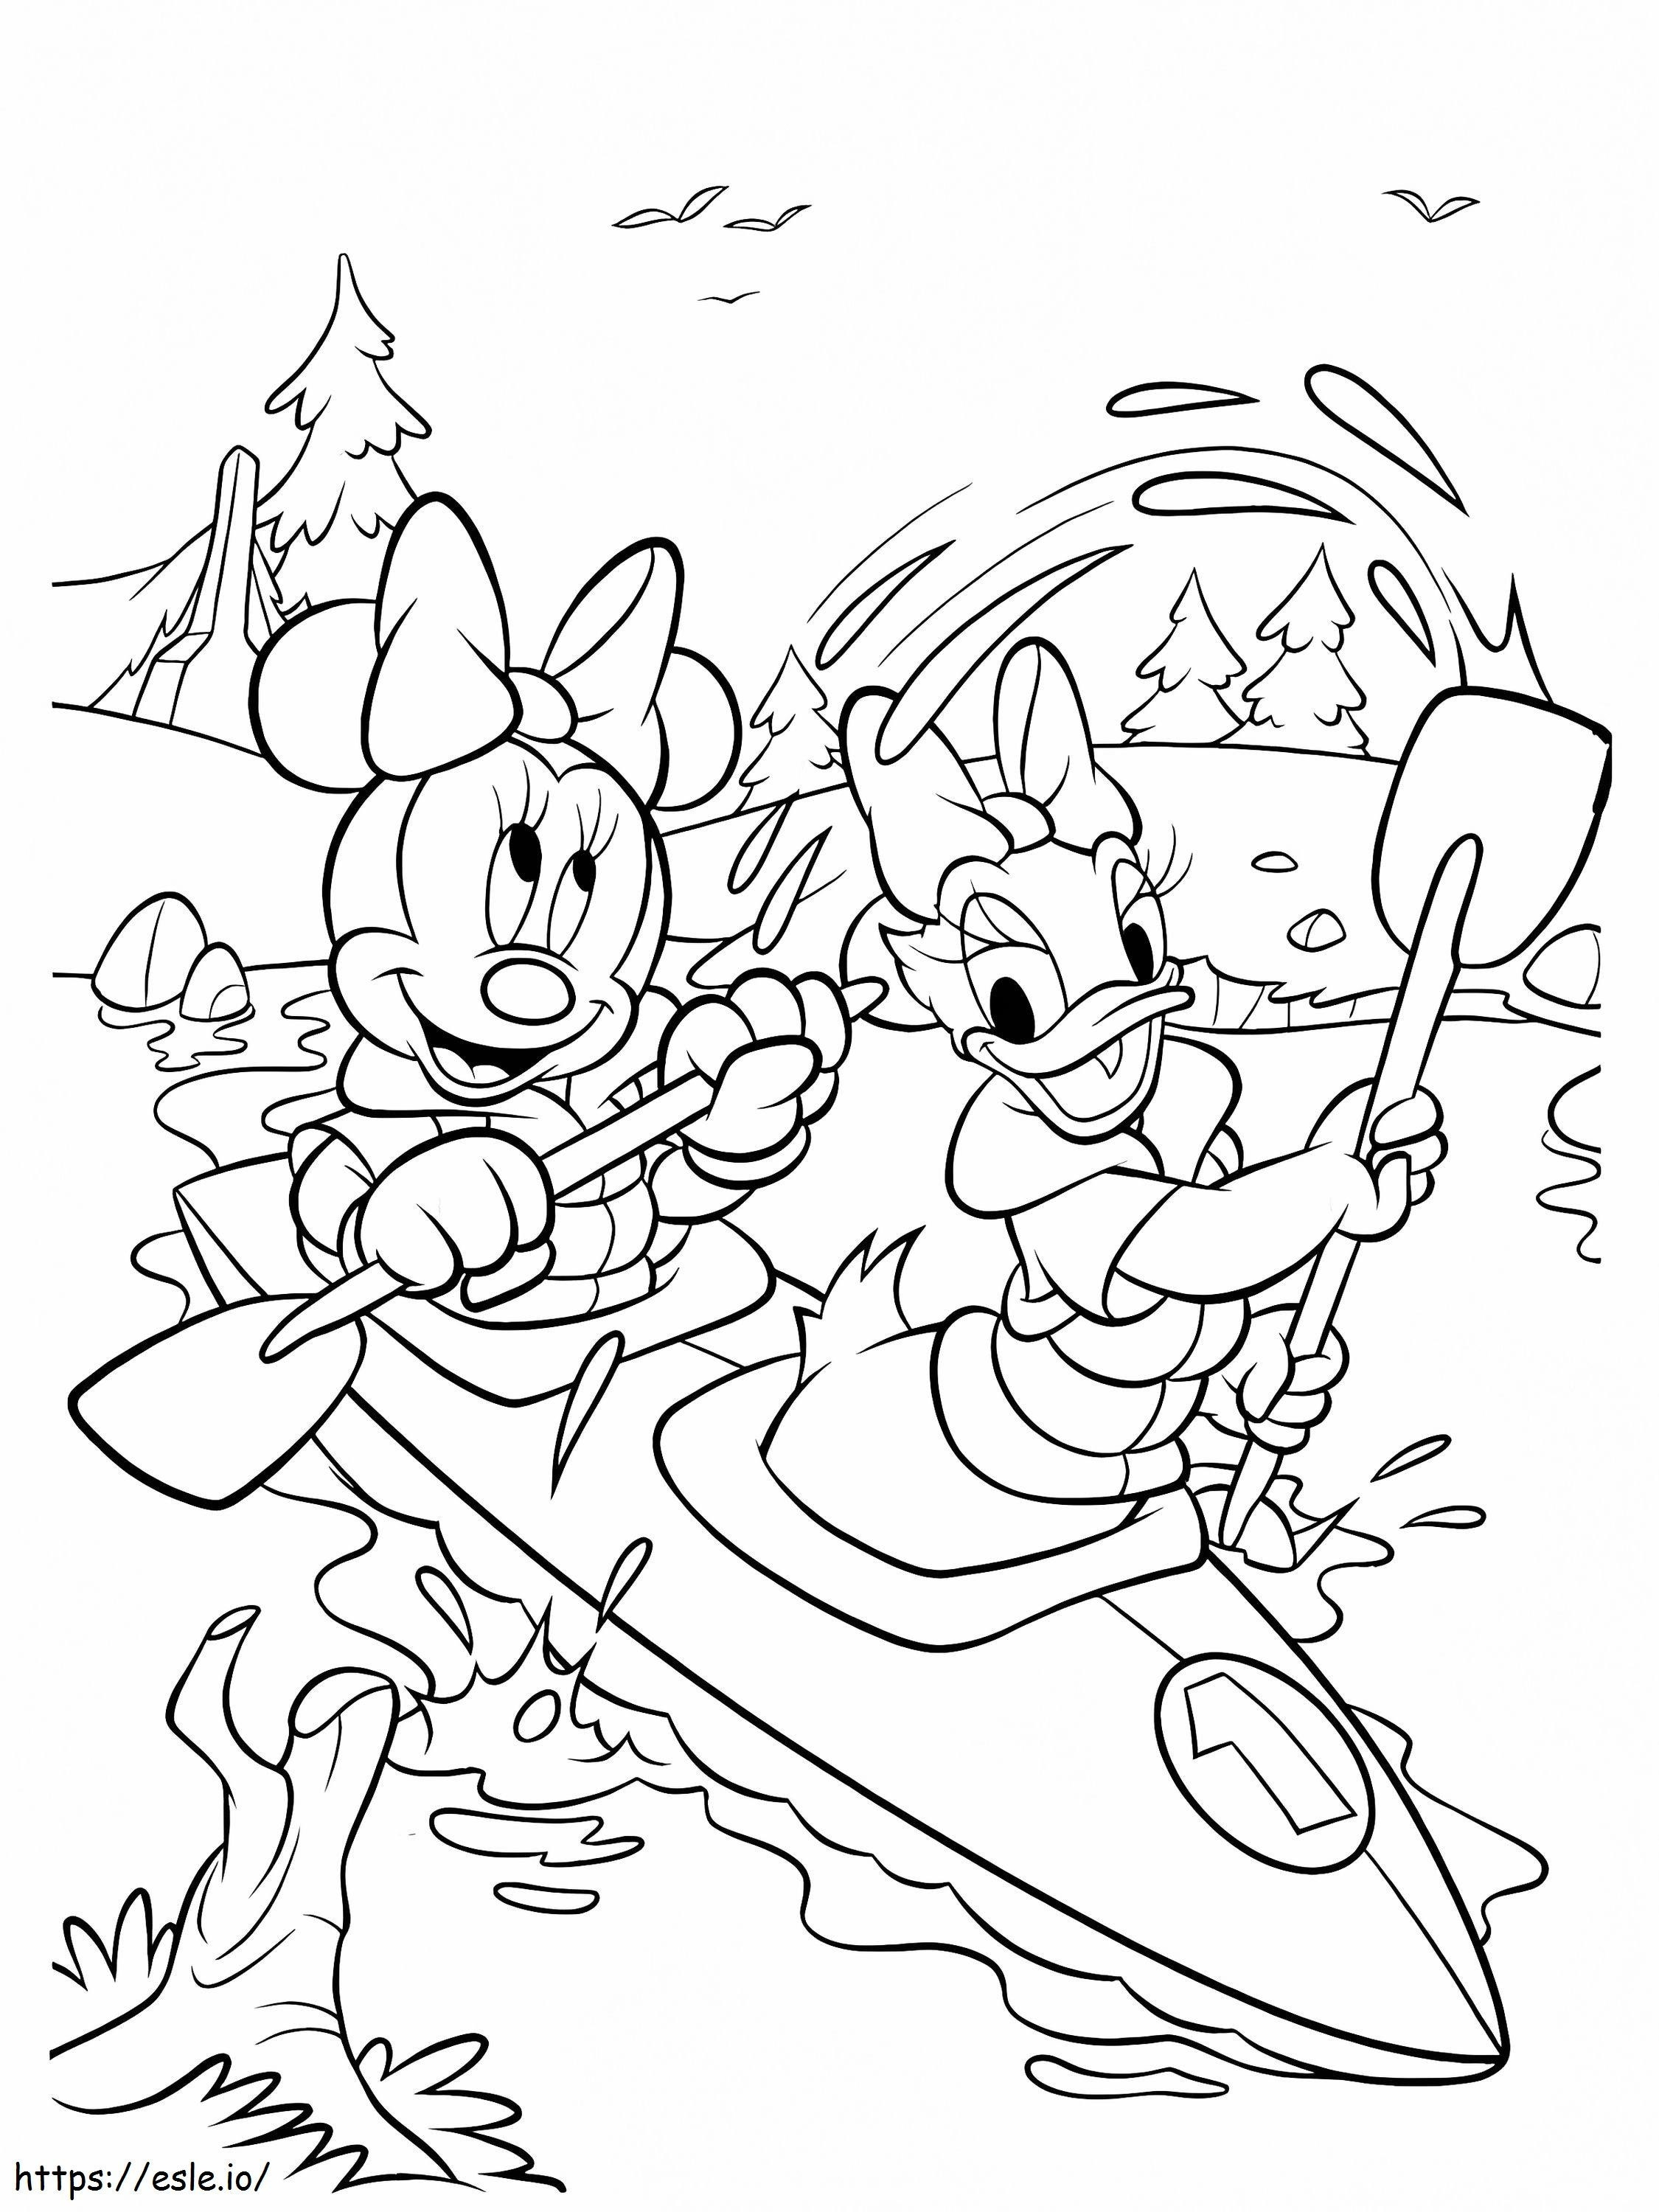 Minnie Mouse And Daisy Duck Rowing A Boat coloring page